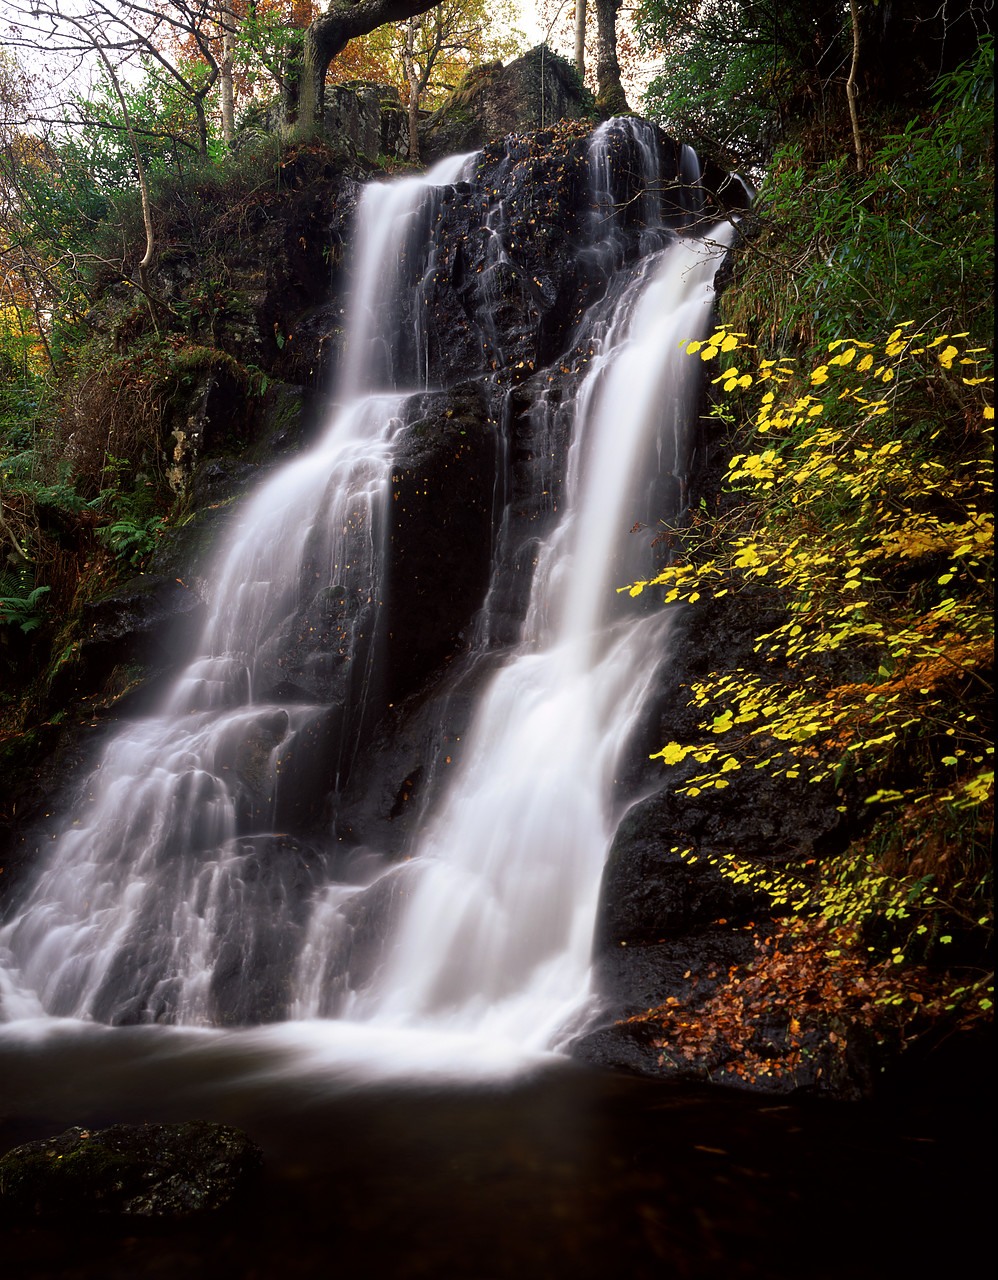 #030384-5 - Waterfall in Autumn, Lake District National Park, Cumbria, England